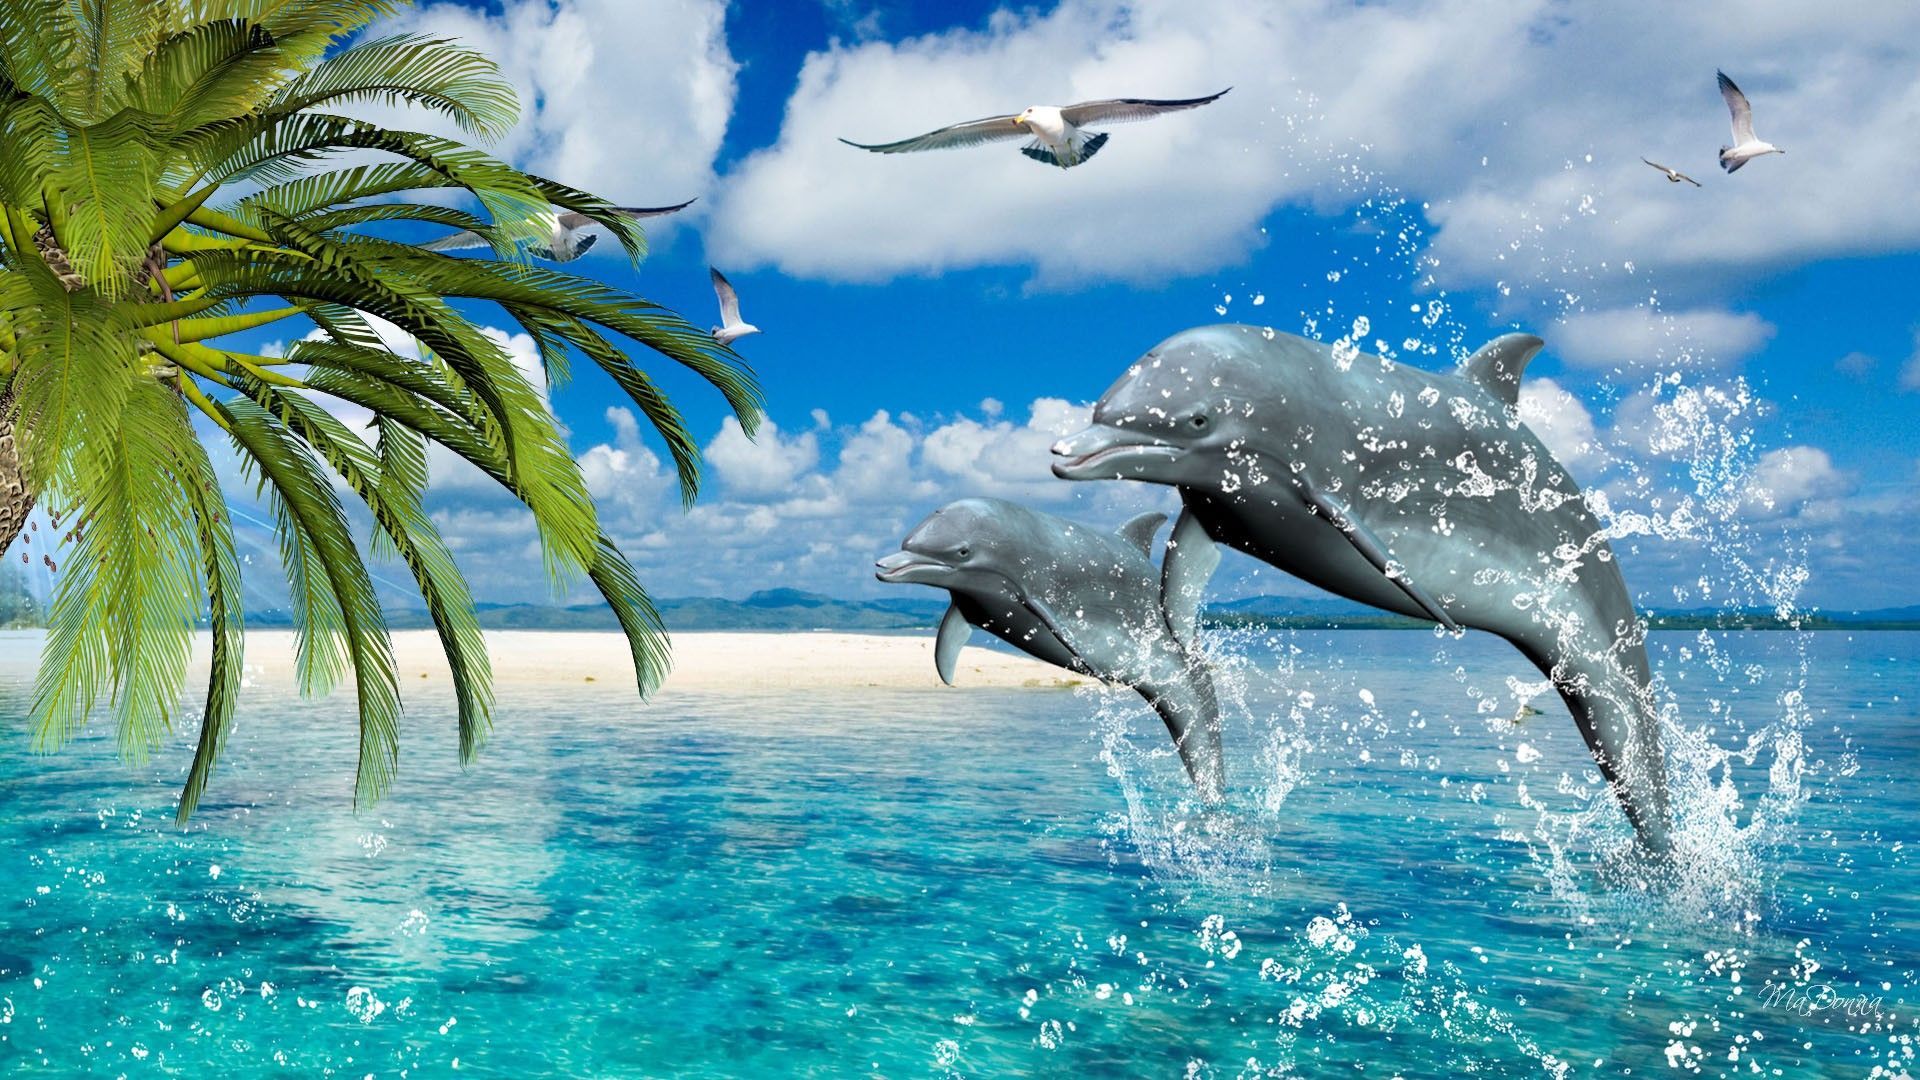 Dolphin Wallpaper. Best Wallpaper. Dolphin image, Dolphins